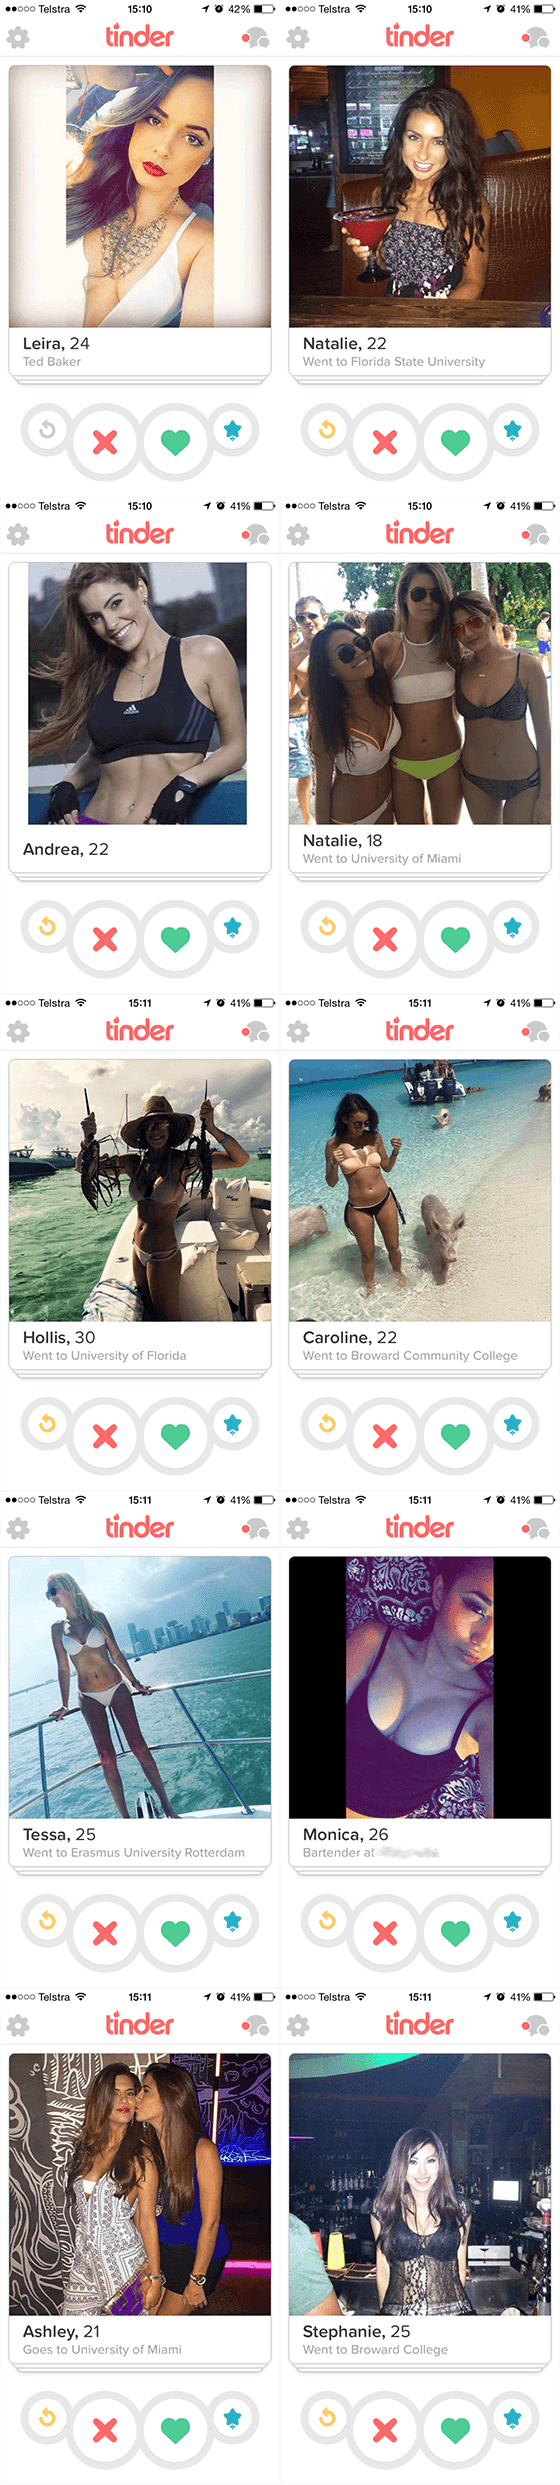 dating apps miami